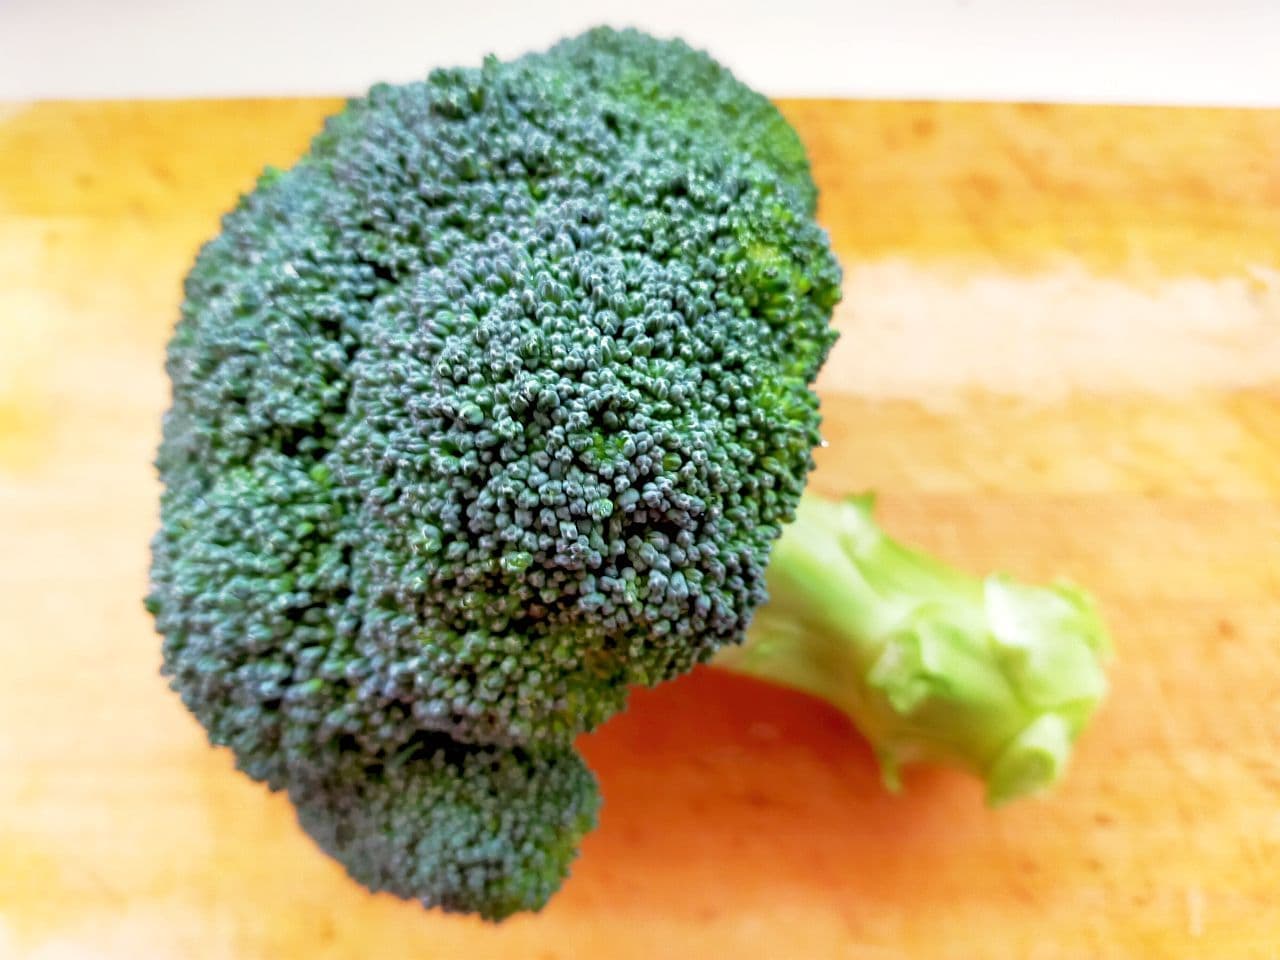 Step 4: Clear to the inside! How to wash broccoli